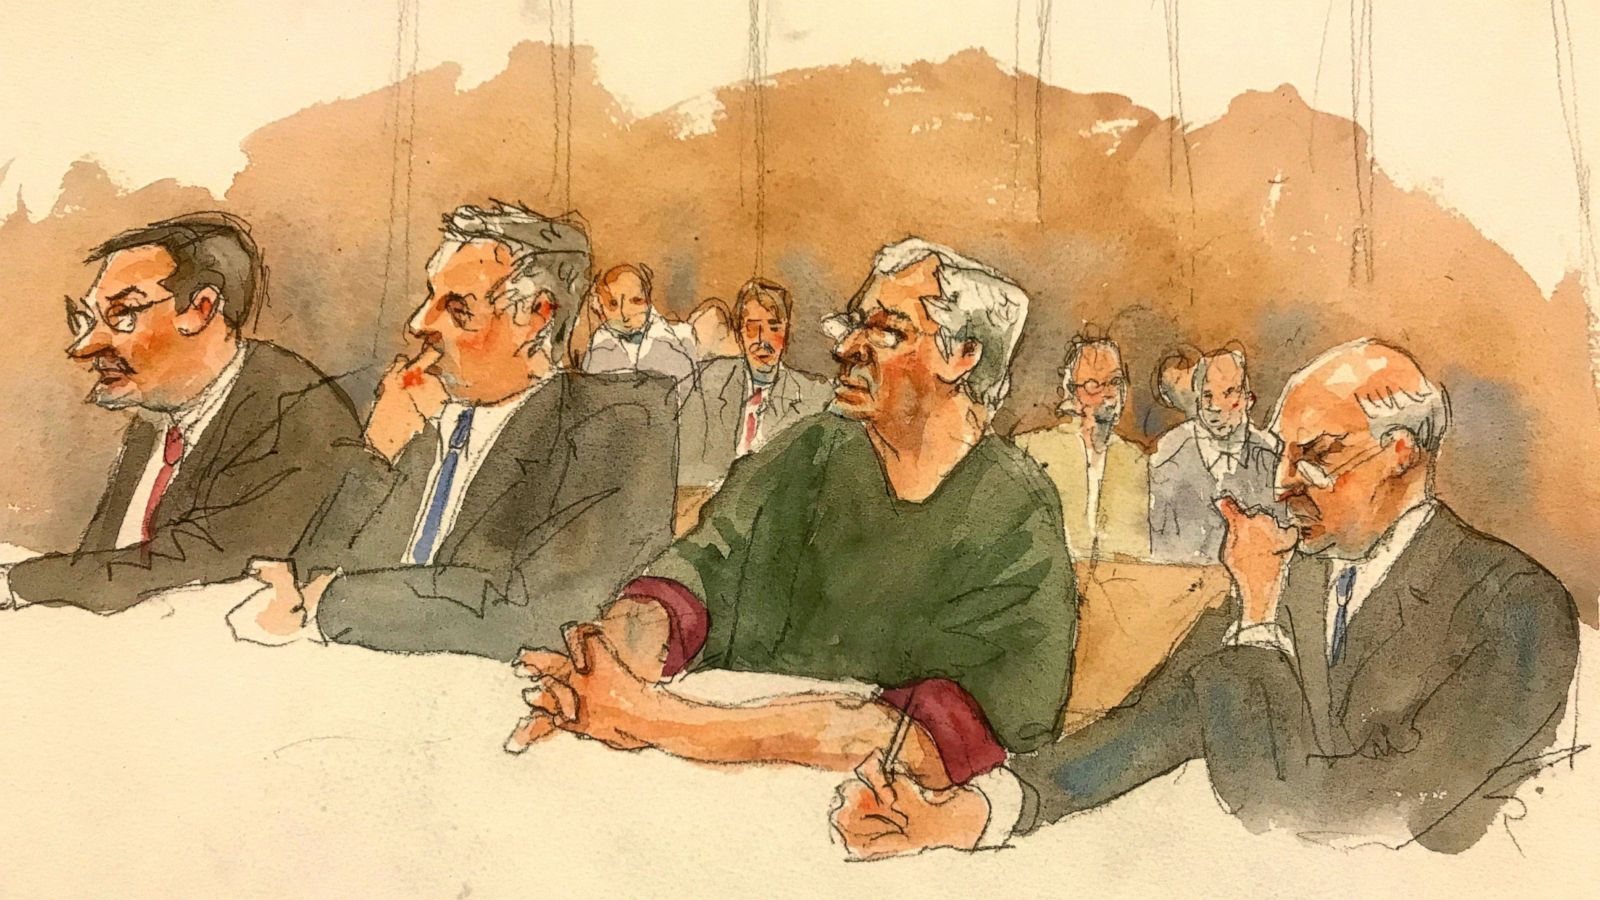 Painting of Epstein and his lawyers in a court room.